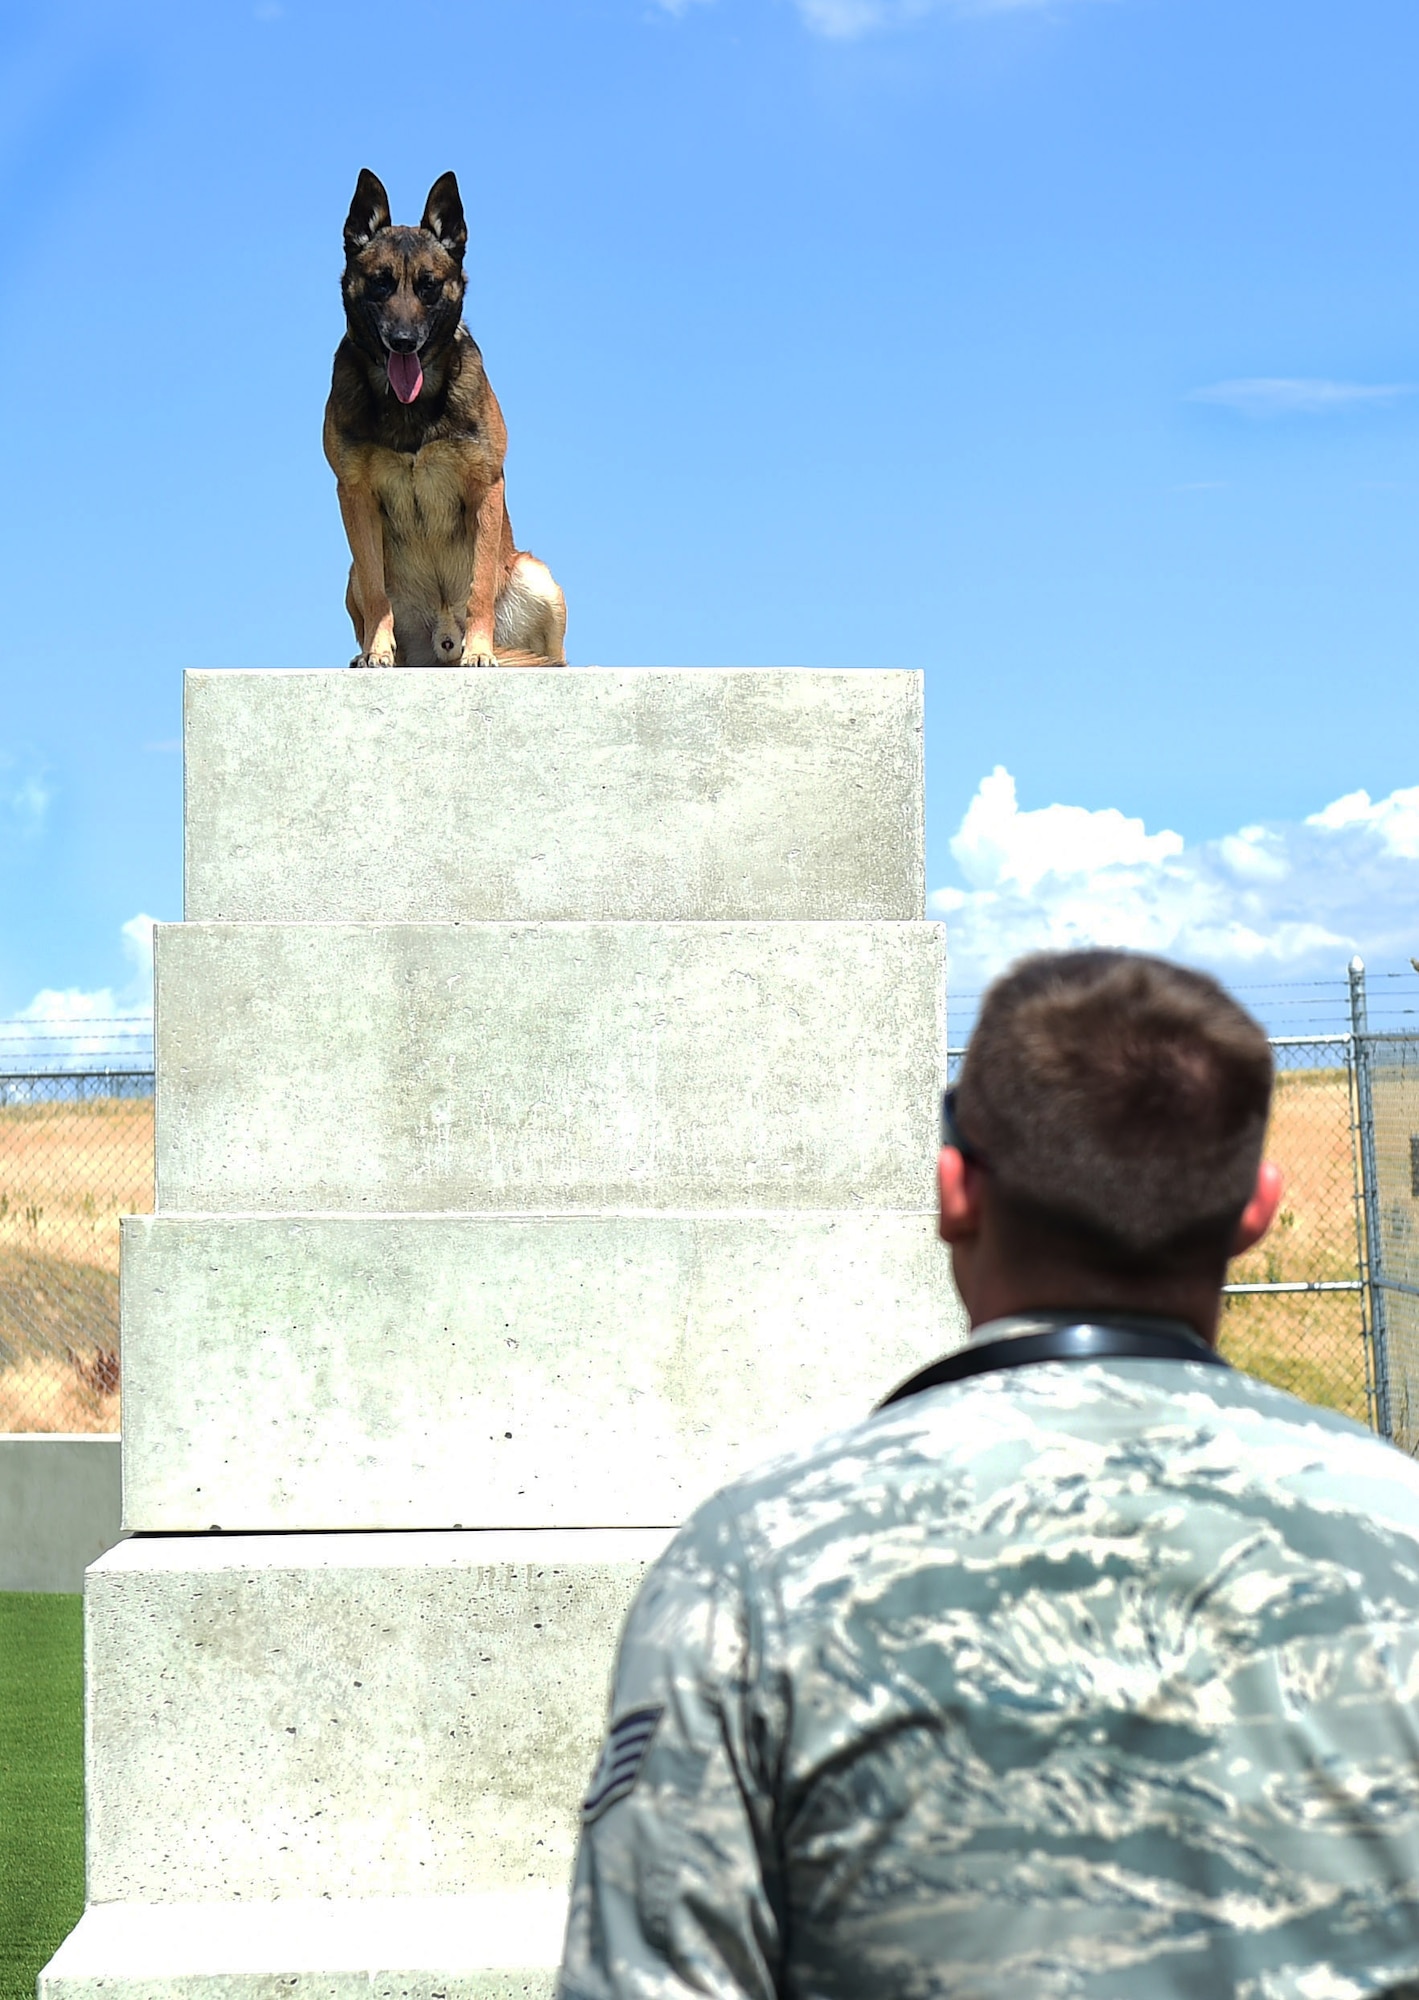 Military Working Dog Chico looks down at his handler Staff Sgt. Tyler Shears, 460th Space Wing Security Forces Squadron Security Forces MWD handler, July 19, 2016, on Buckley Air Force Base, Colo. The MWD trainers work together with their canine companions on a daily basis and must maintain the health and well-being of the dogs. (U.S. Air Force photo by Airman 1st Class Gabrielle Spradling/Released)